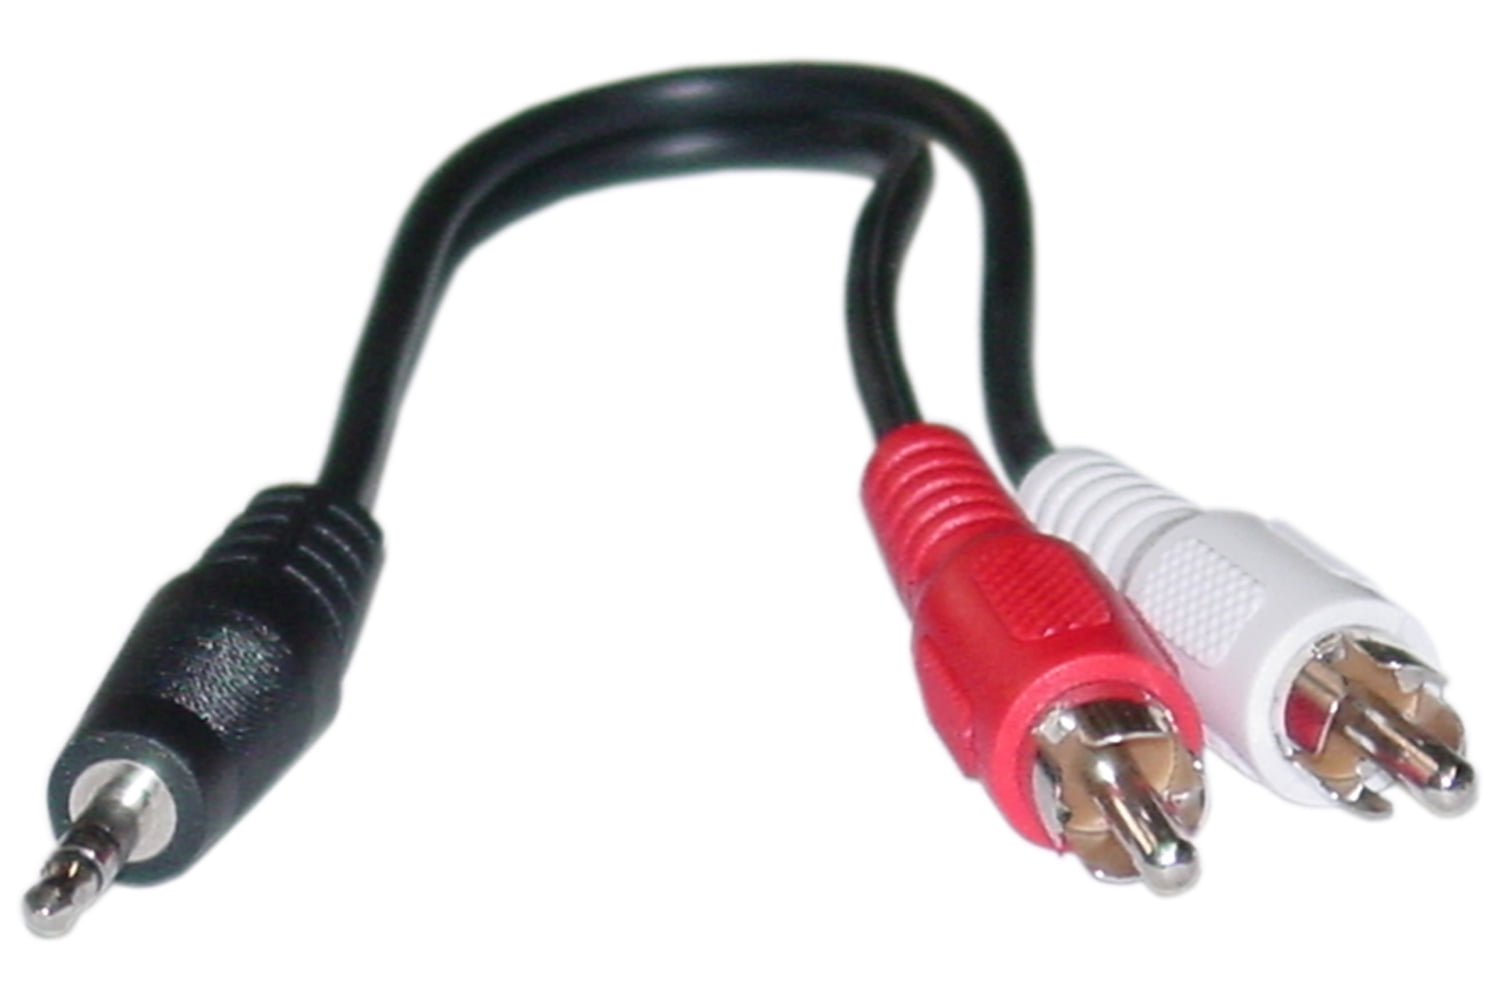 Offex 3.5mm Stereo to Dual Audio Cable, 3.5mm Male to Dual RCA Male (Red/White), 6 inch - Walmart.com